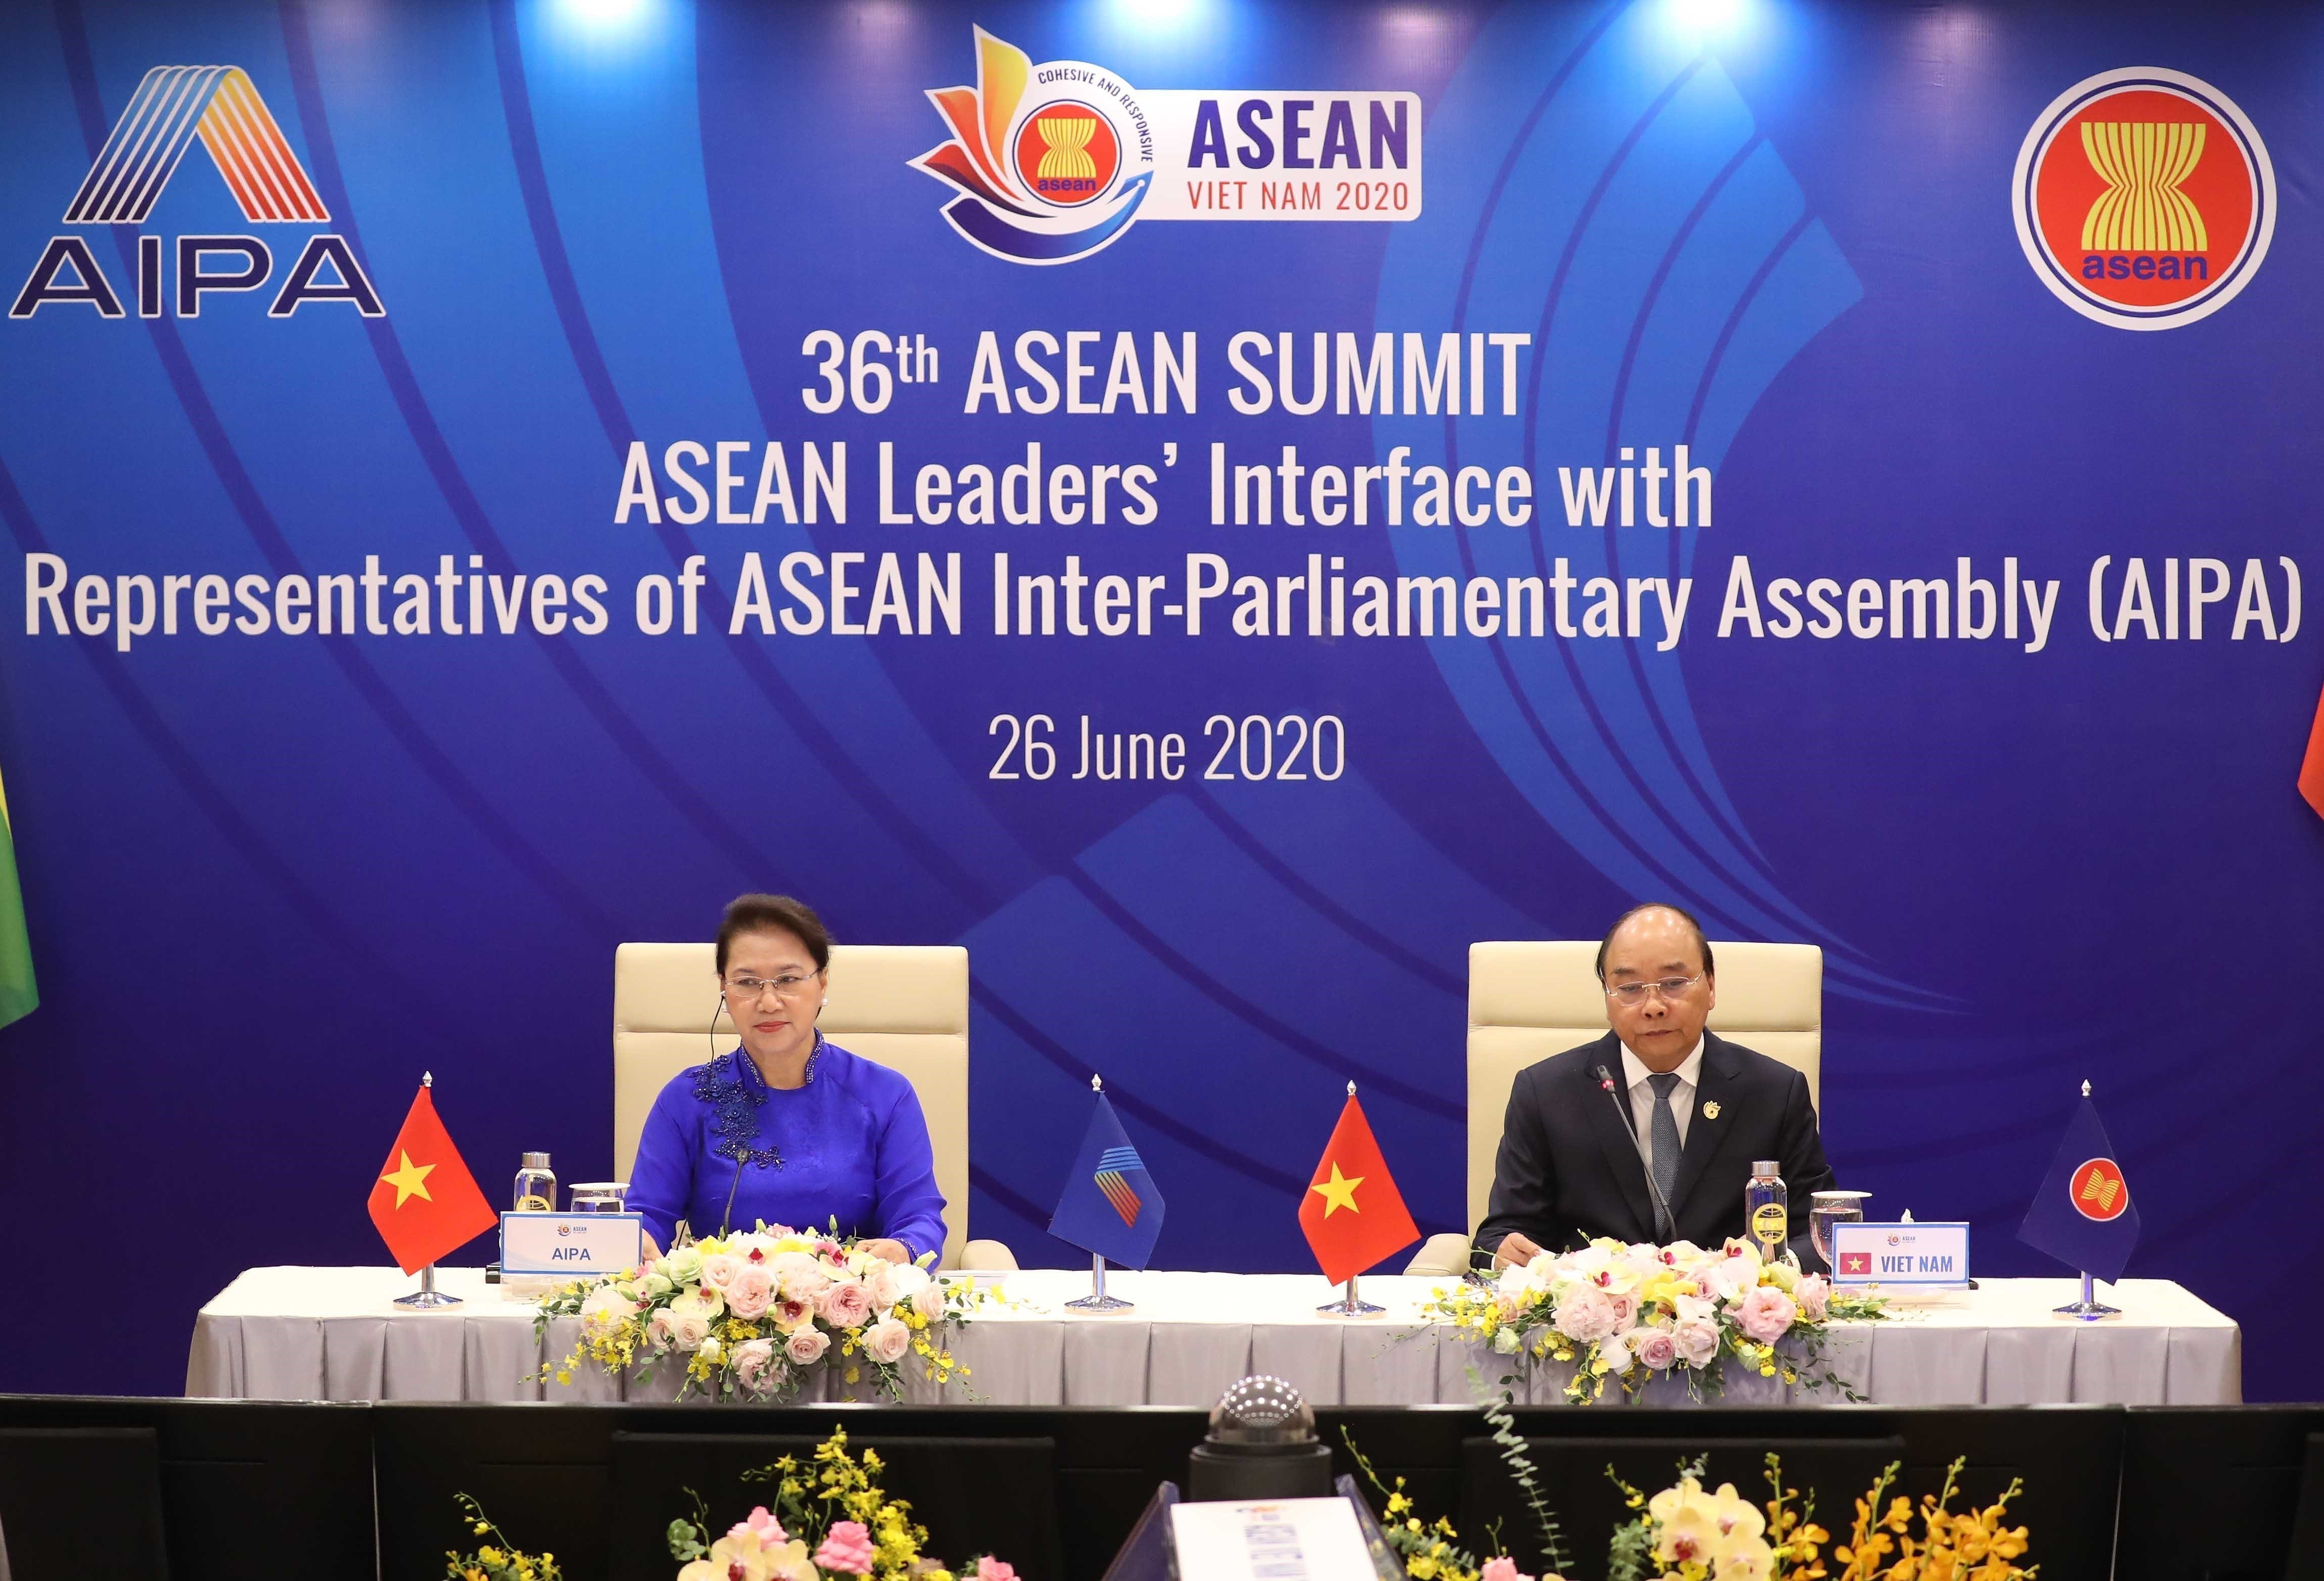 ASEAN Leaders’ Interface with Representatives of ASEAN Inter-Parliamentary Assembly hinh anh 10